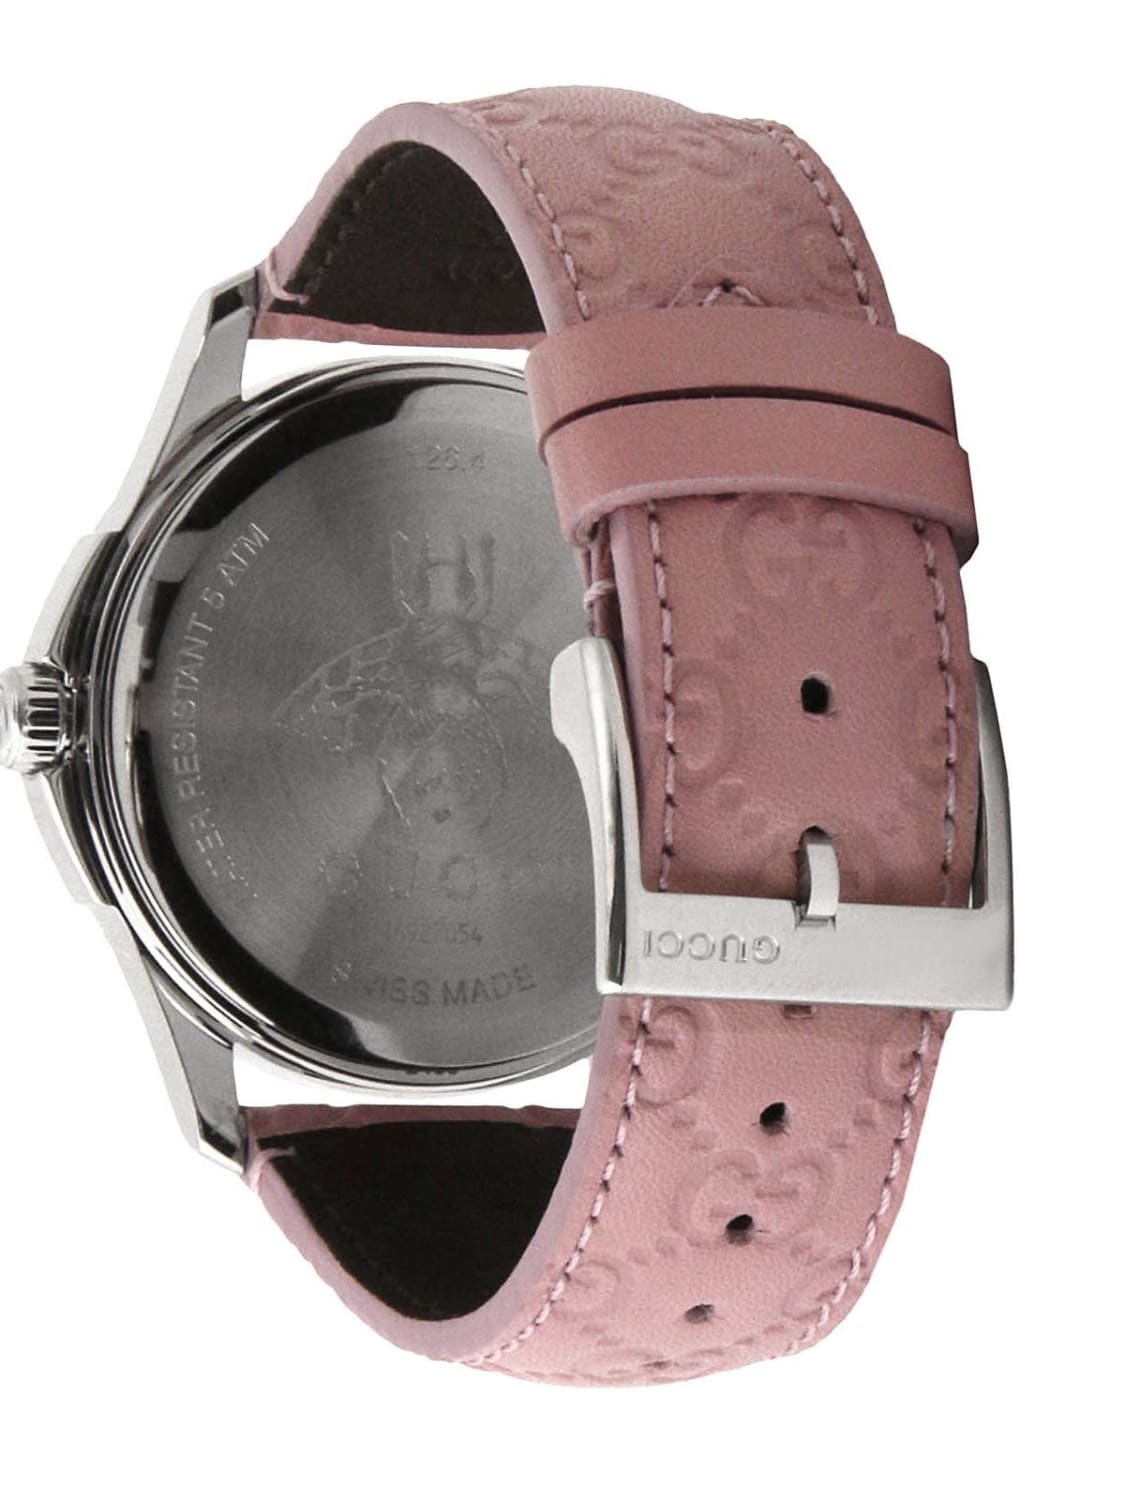 GUCCI: G-Timeless watch case 38 mm with the engraved GG monogram